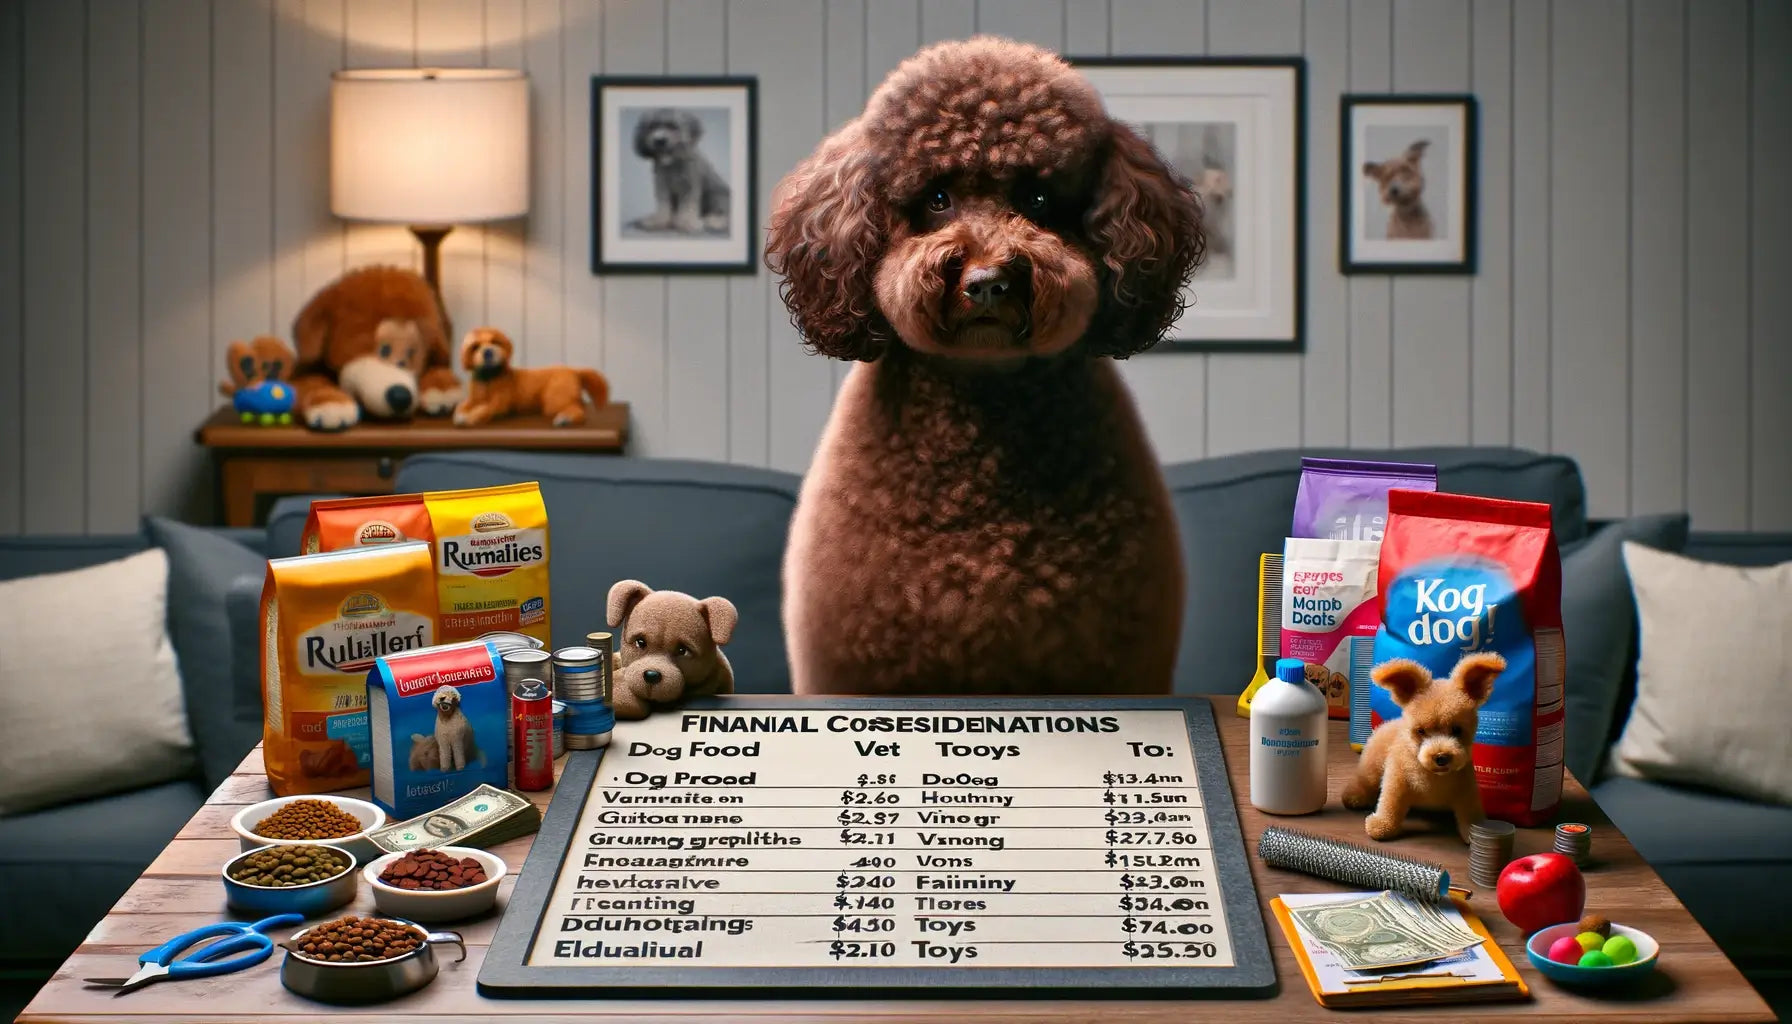 An infographic on financial considerations for Brown Poodle owners, detailing various costs associated with pet care.